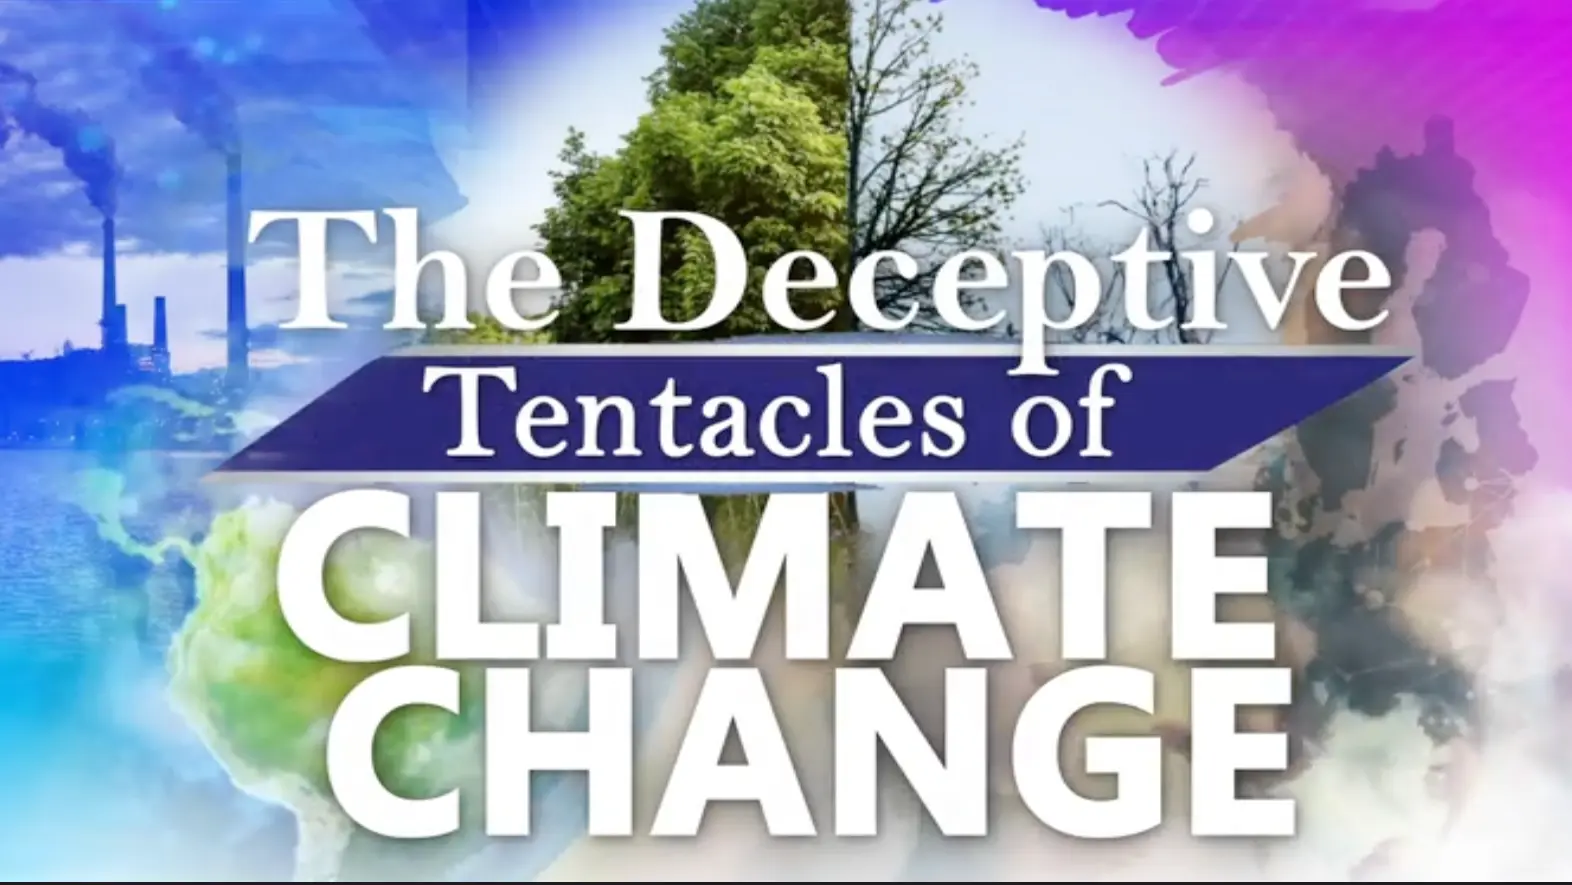 THE DECEPTIVE TENTACLES OF CLIMATE CHANGE